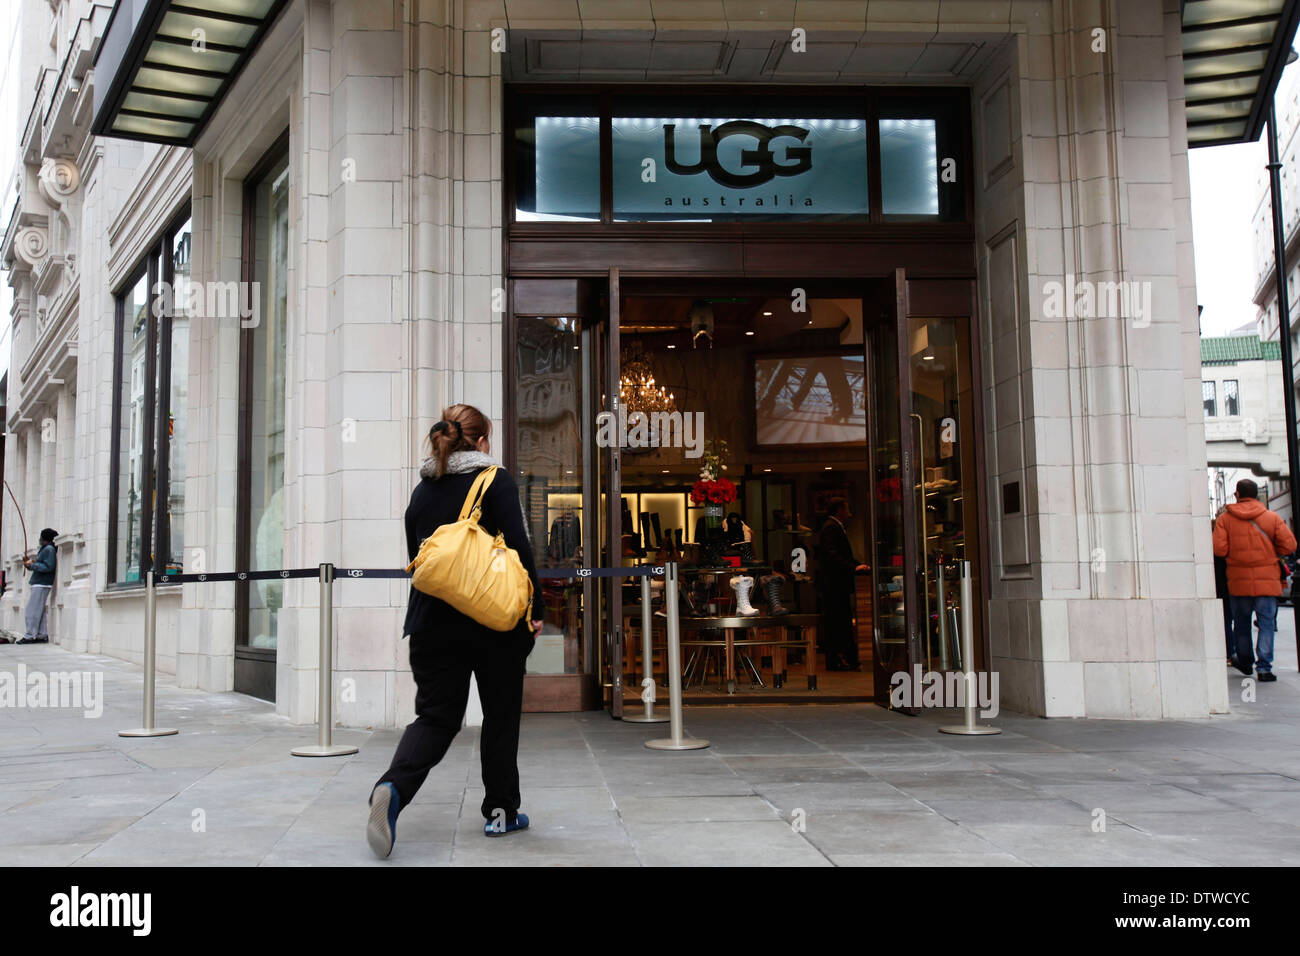 A general view of UGG Australia store at 10 Glasshouse Street in central  London Britain 22 November 2012 Stock Photo - Alamy